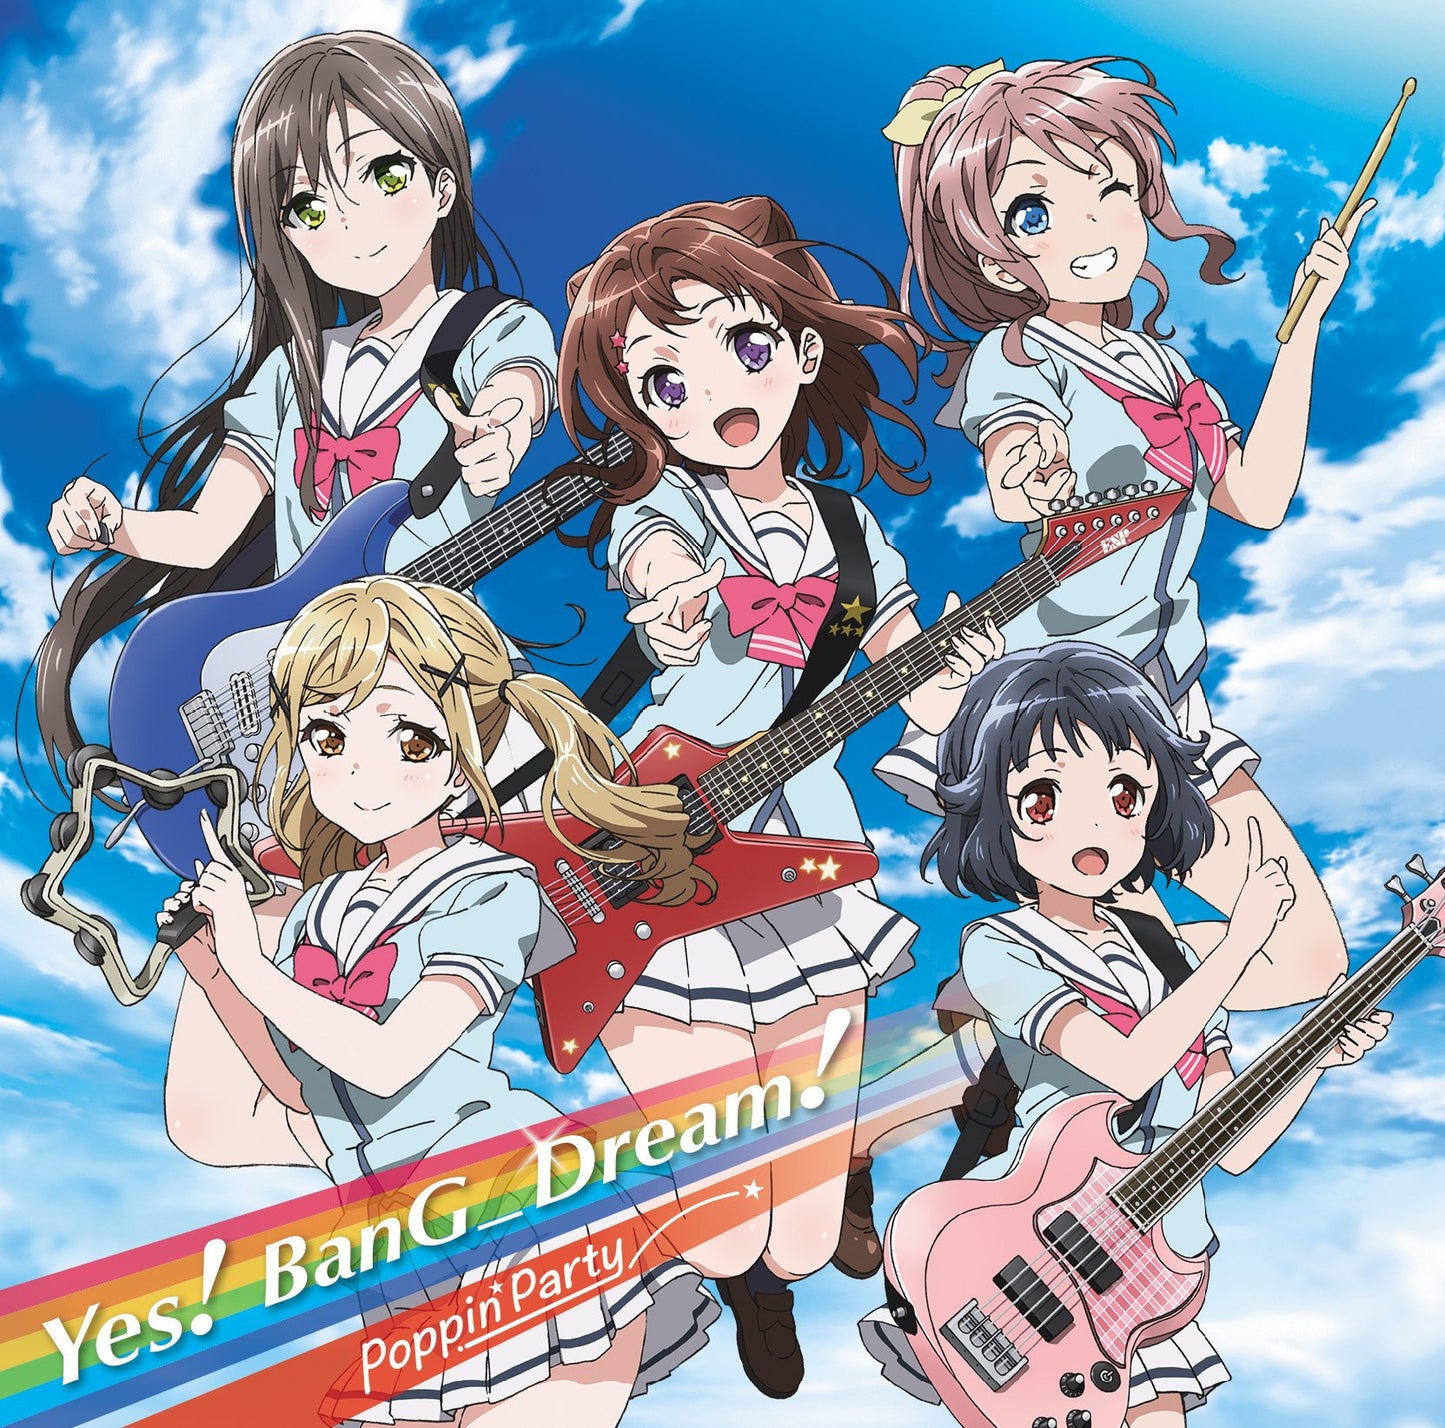 Poppin'Party 1st Single "Yes! BanG Dream!"